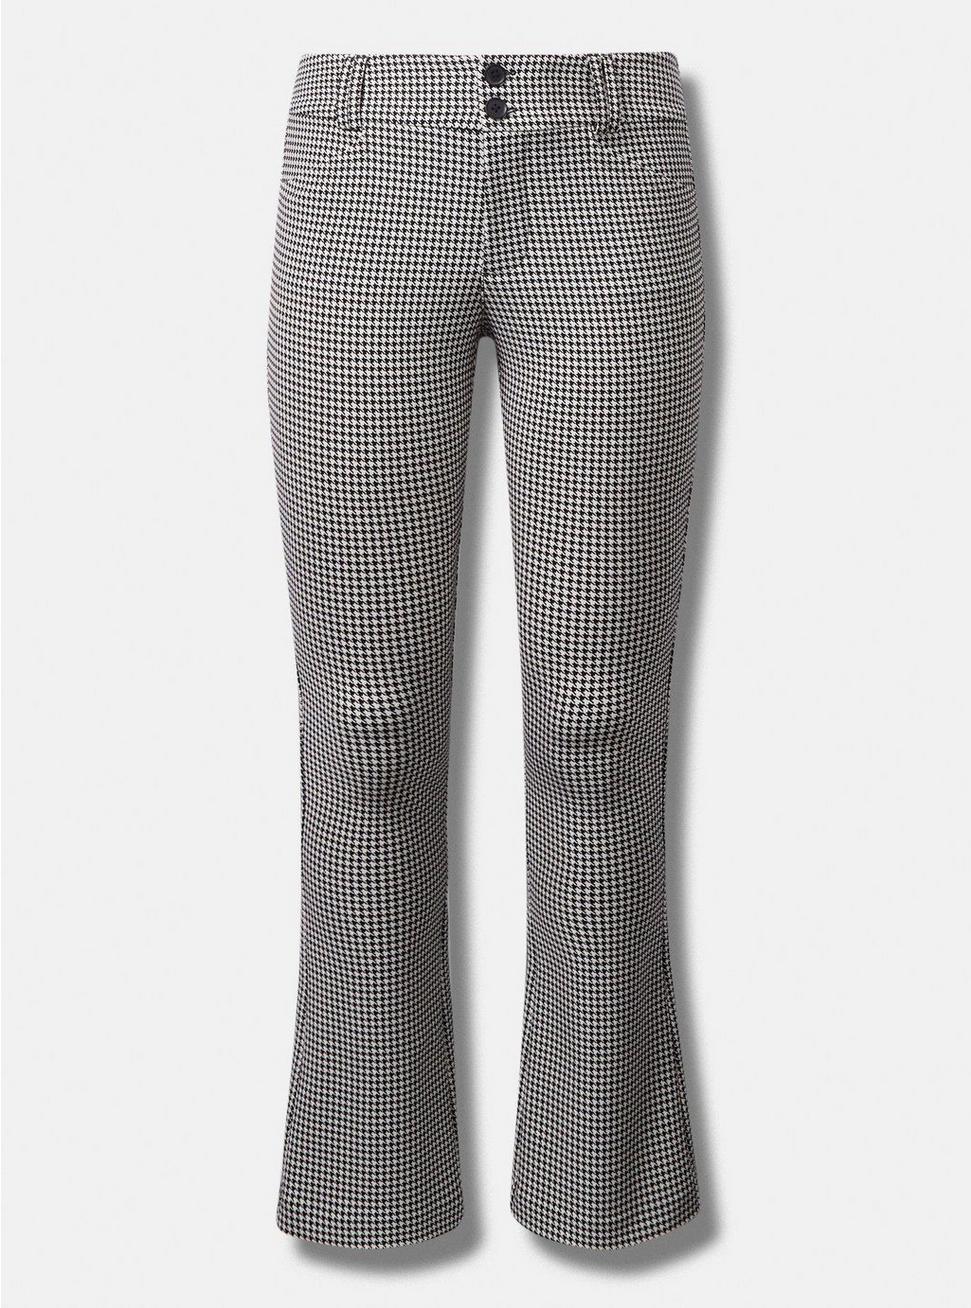 Trouser Boot Studio Luxe Ponte Mid-Rise Pant, TEXTURED HOUNDSTOOTH, hi-res